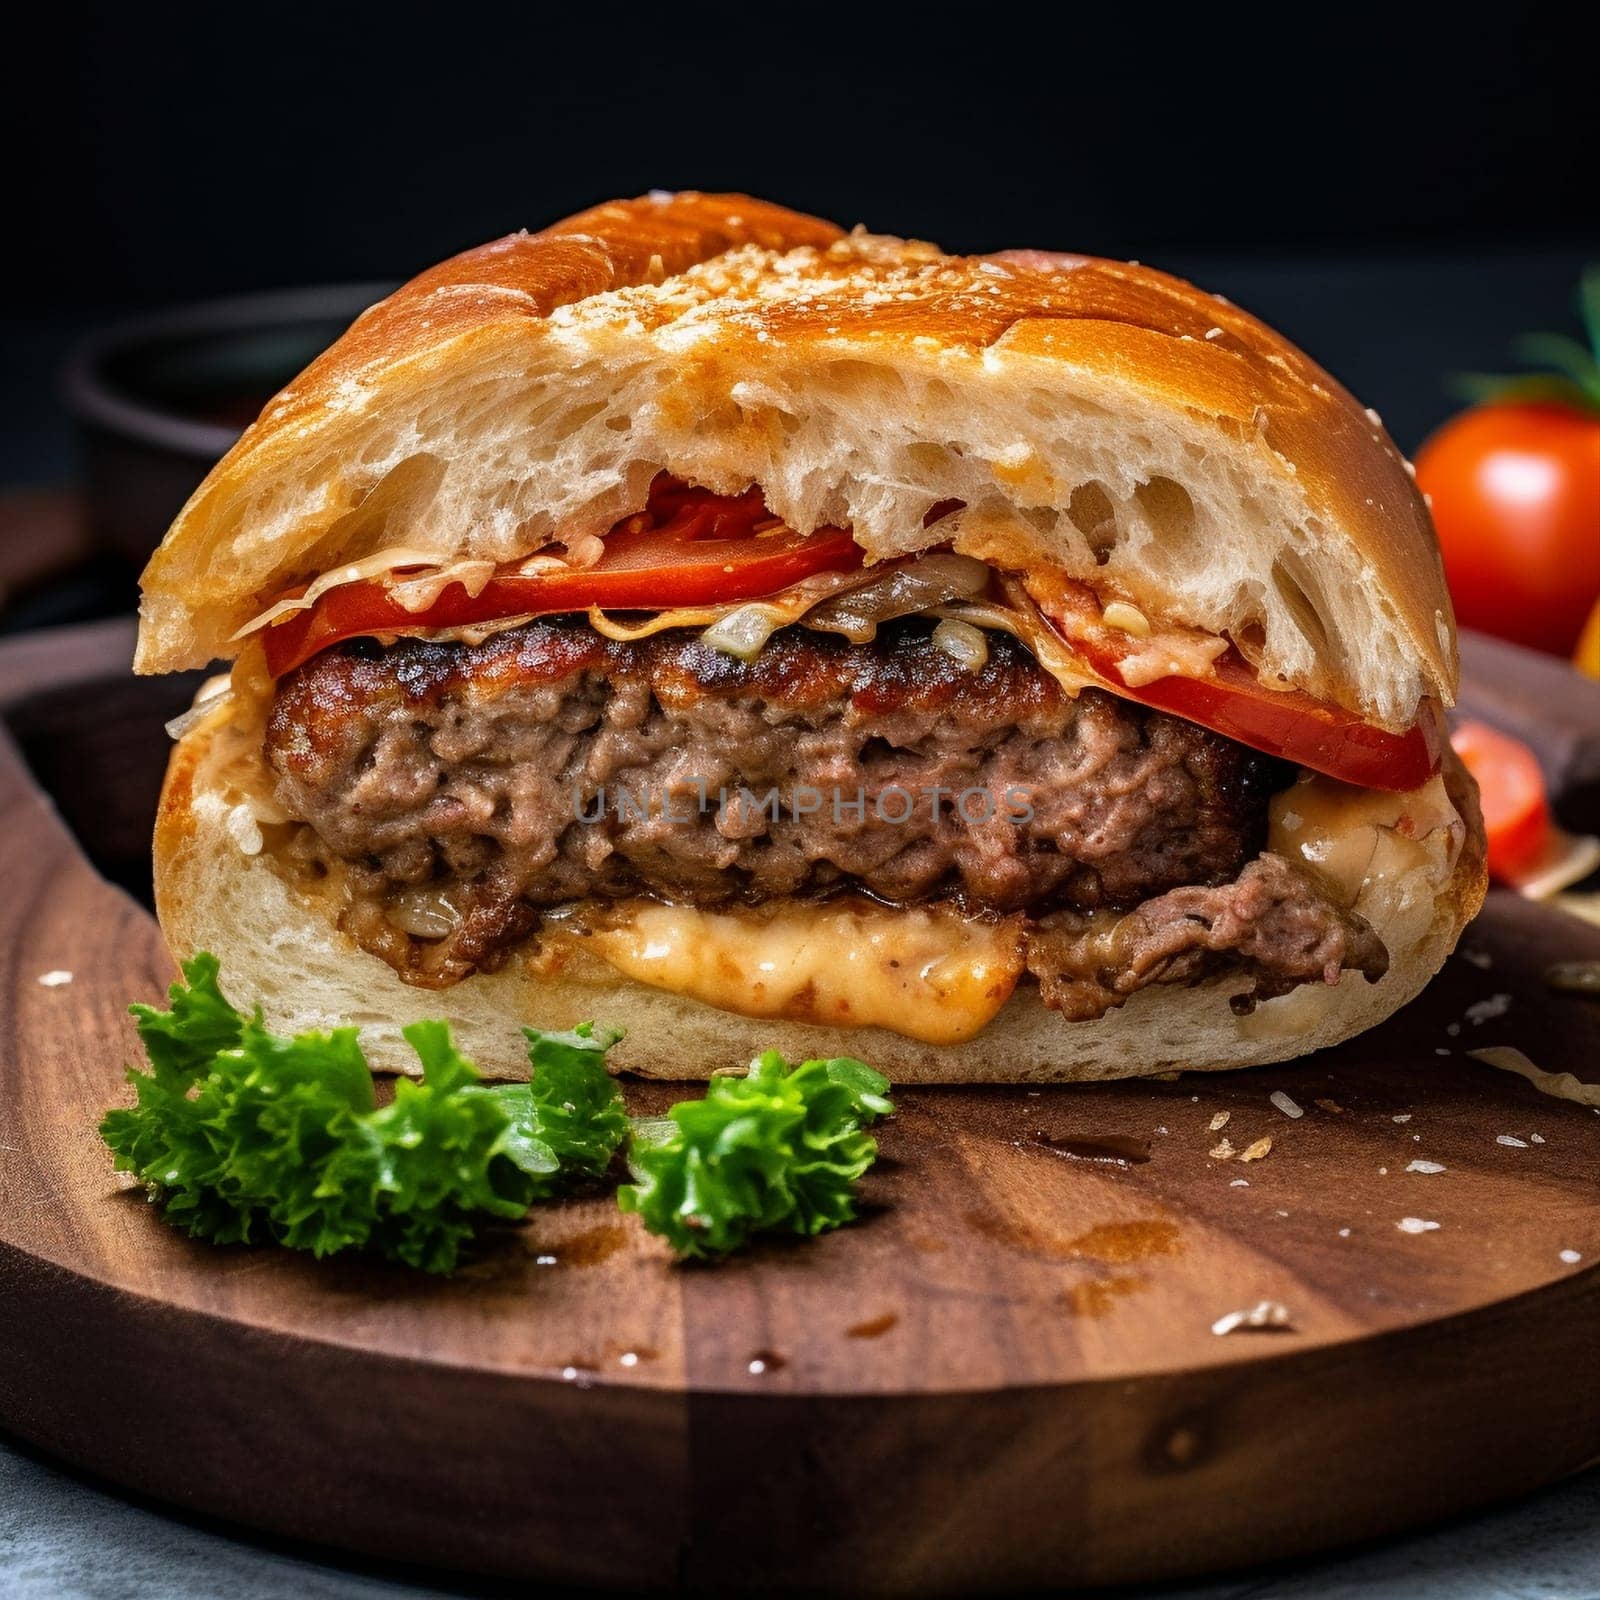 Serbian Pljeskavica: Mouthwatering and Juicy Grilled Meat Patty with Toppings on a Bun by Sahin